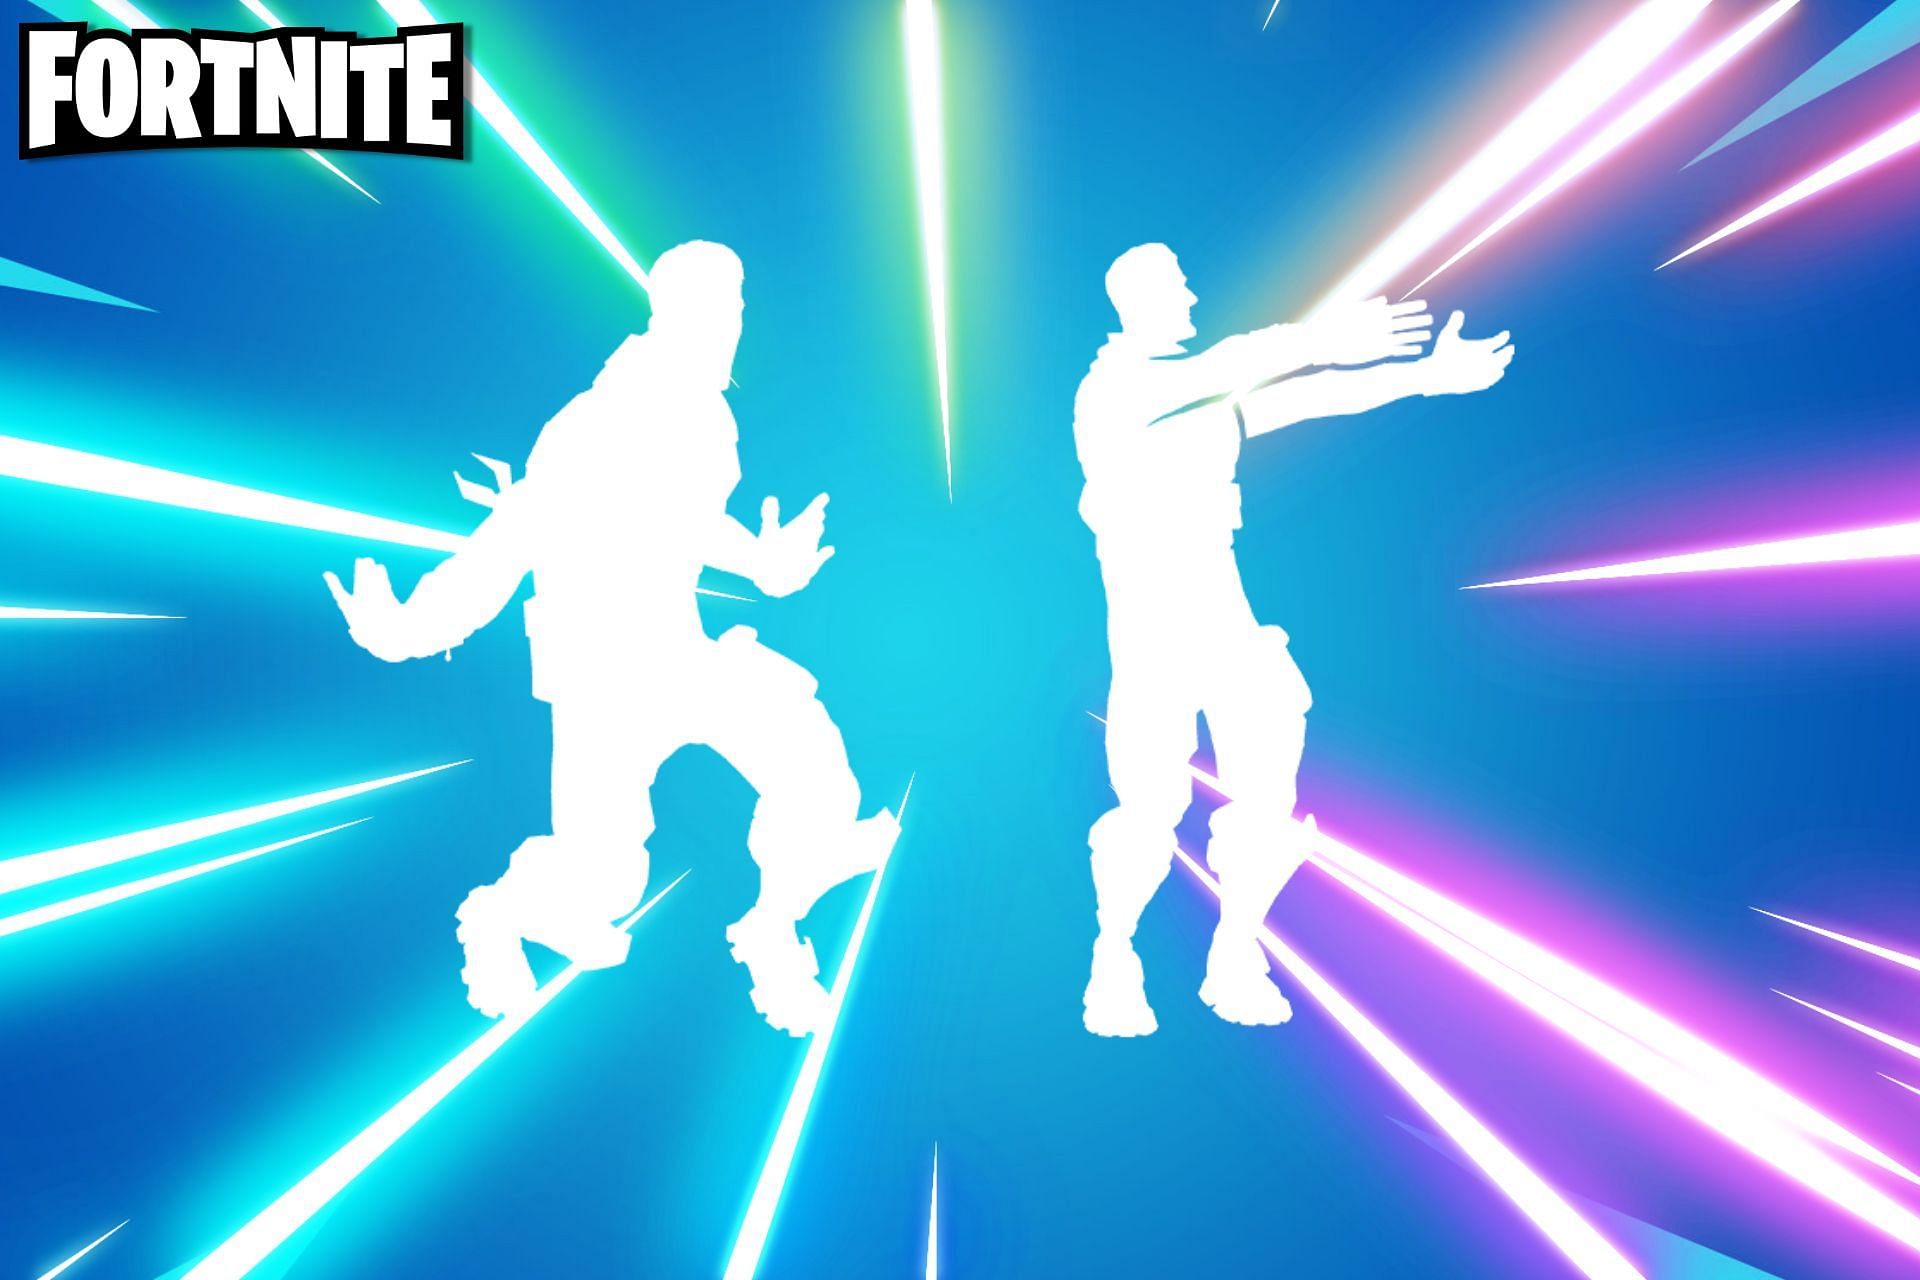 These emotes are far too embarrassing to be used in Fortnite (Image via Sportskeeda)